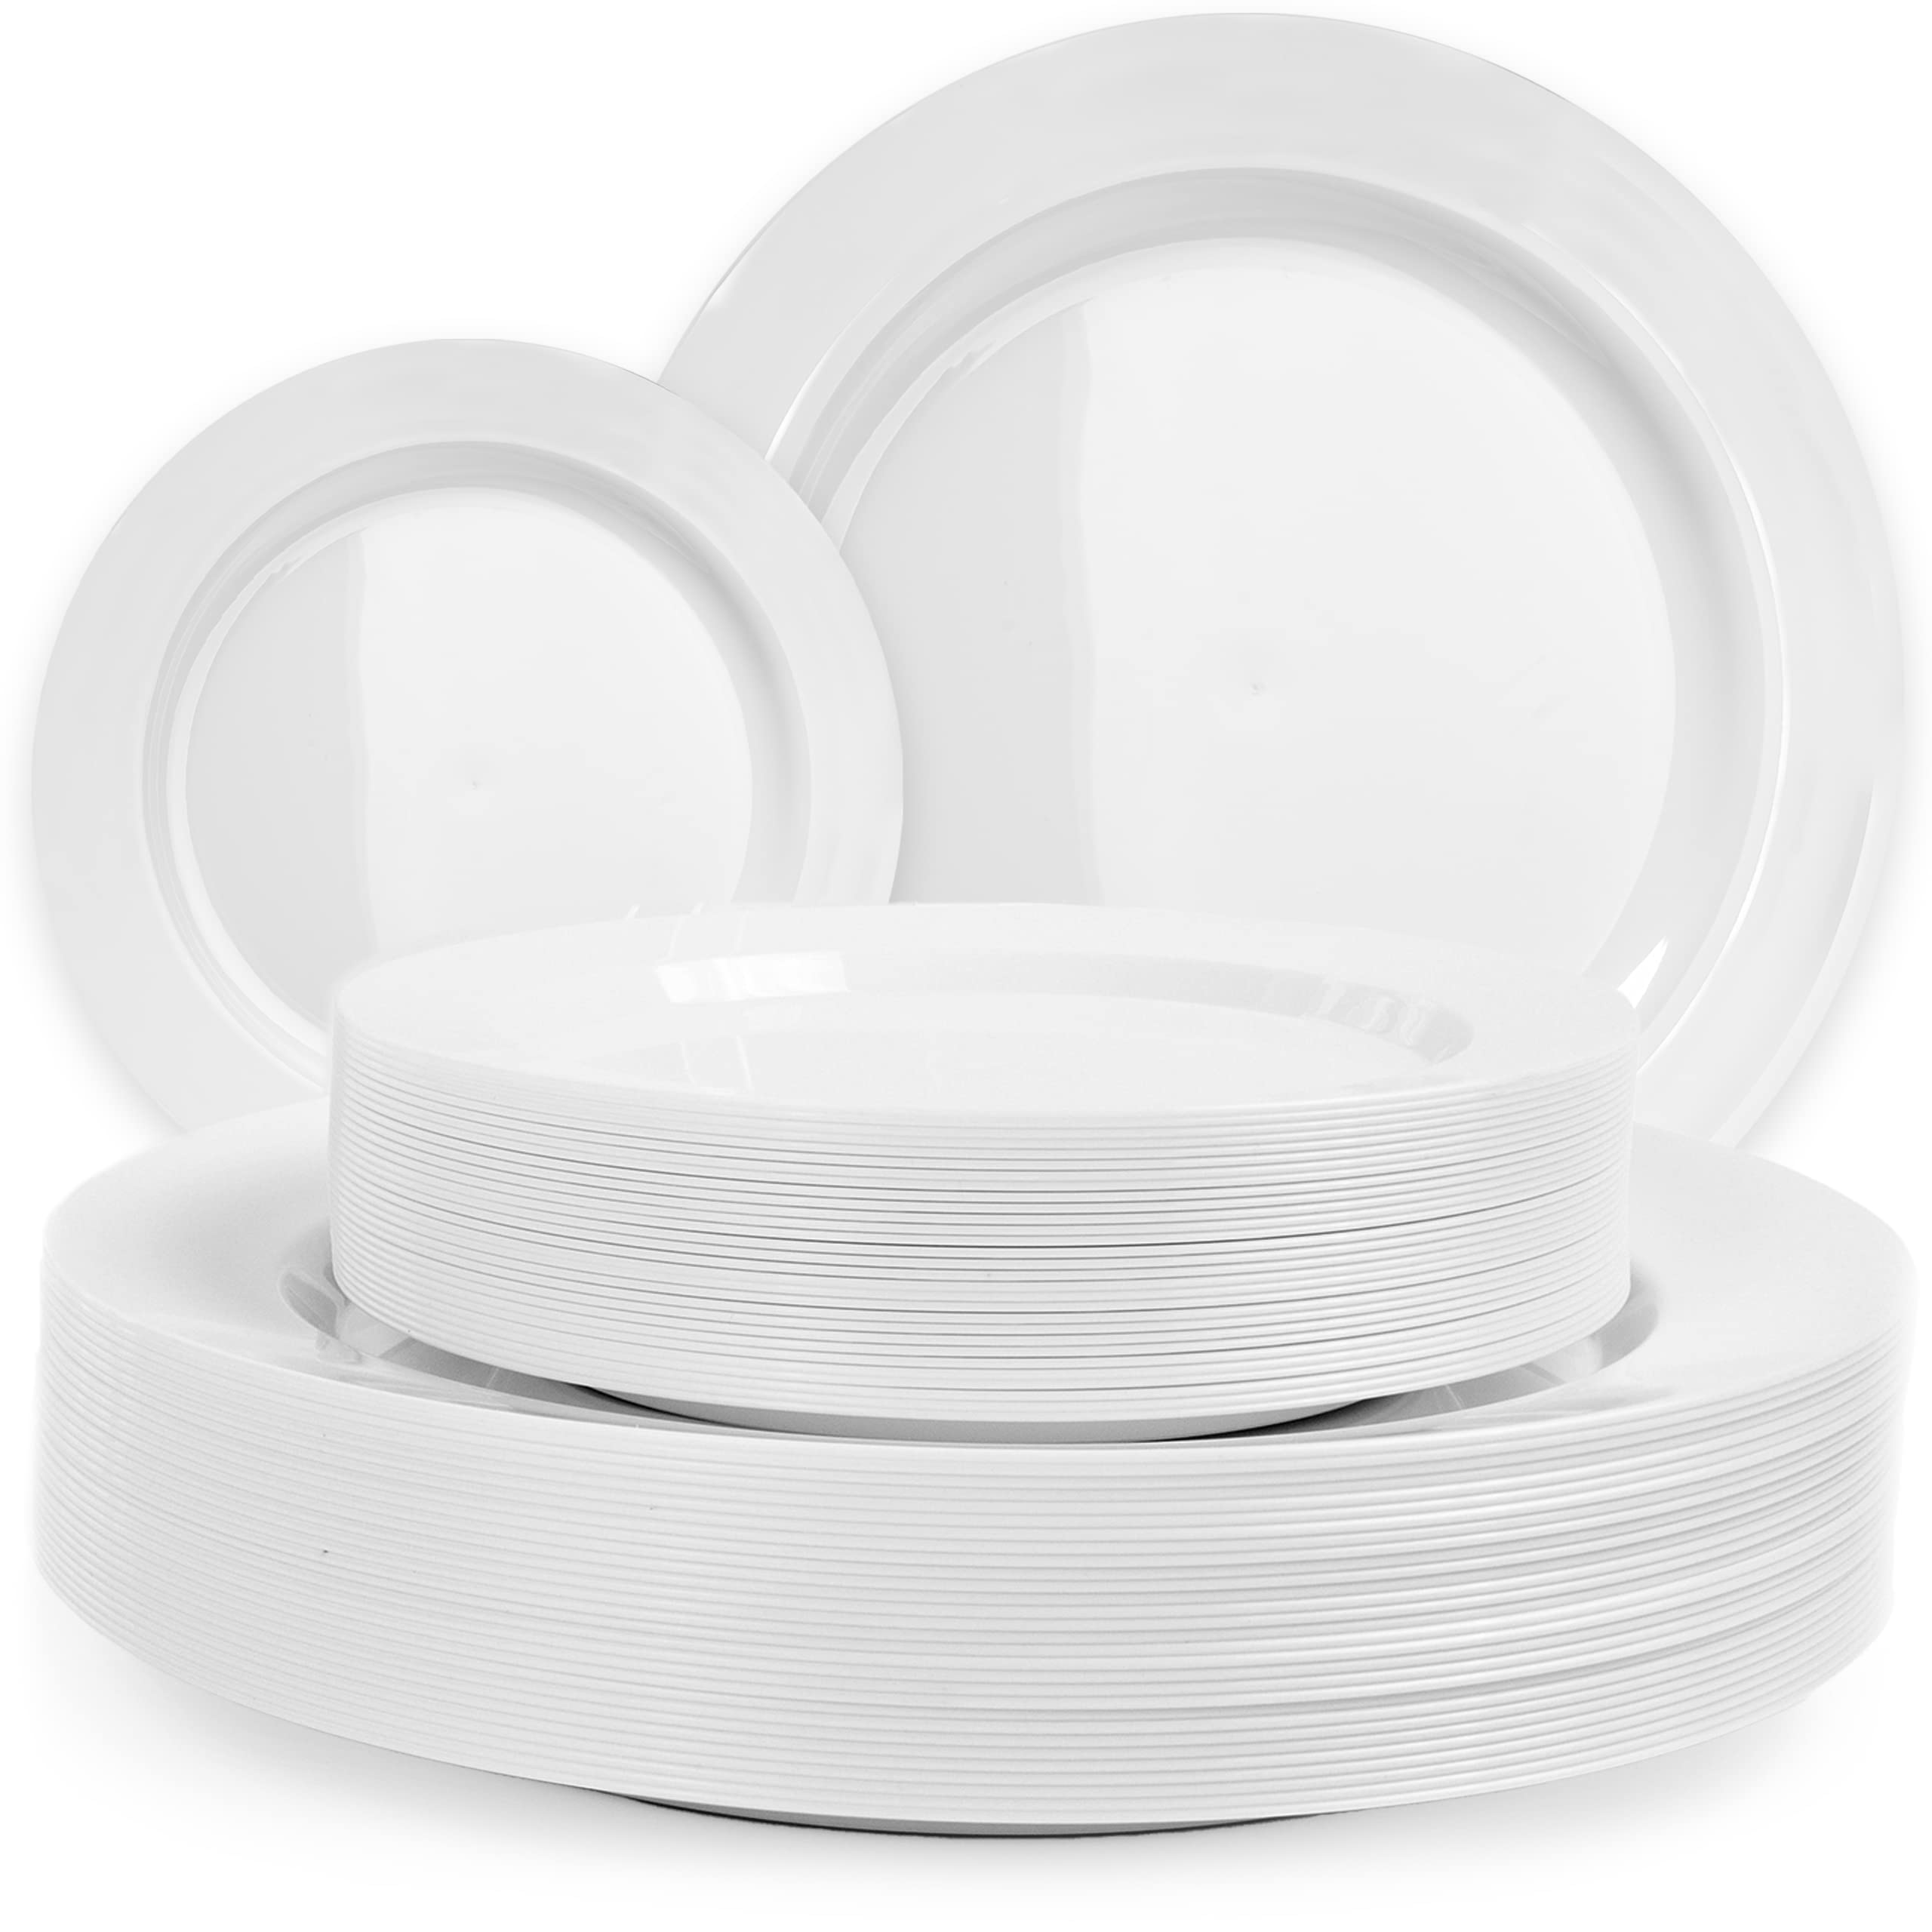 Prestee 60 White Plastic Plates Disposable, Heavy Duty for Party - 30 Dinner Plates 10.25" + 30 Salad Dessert Appetizer Plates 7.5", Hard Party Plate, Elegant Christmas, Holiday Parties, White Plates  - Good